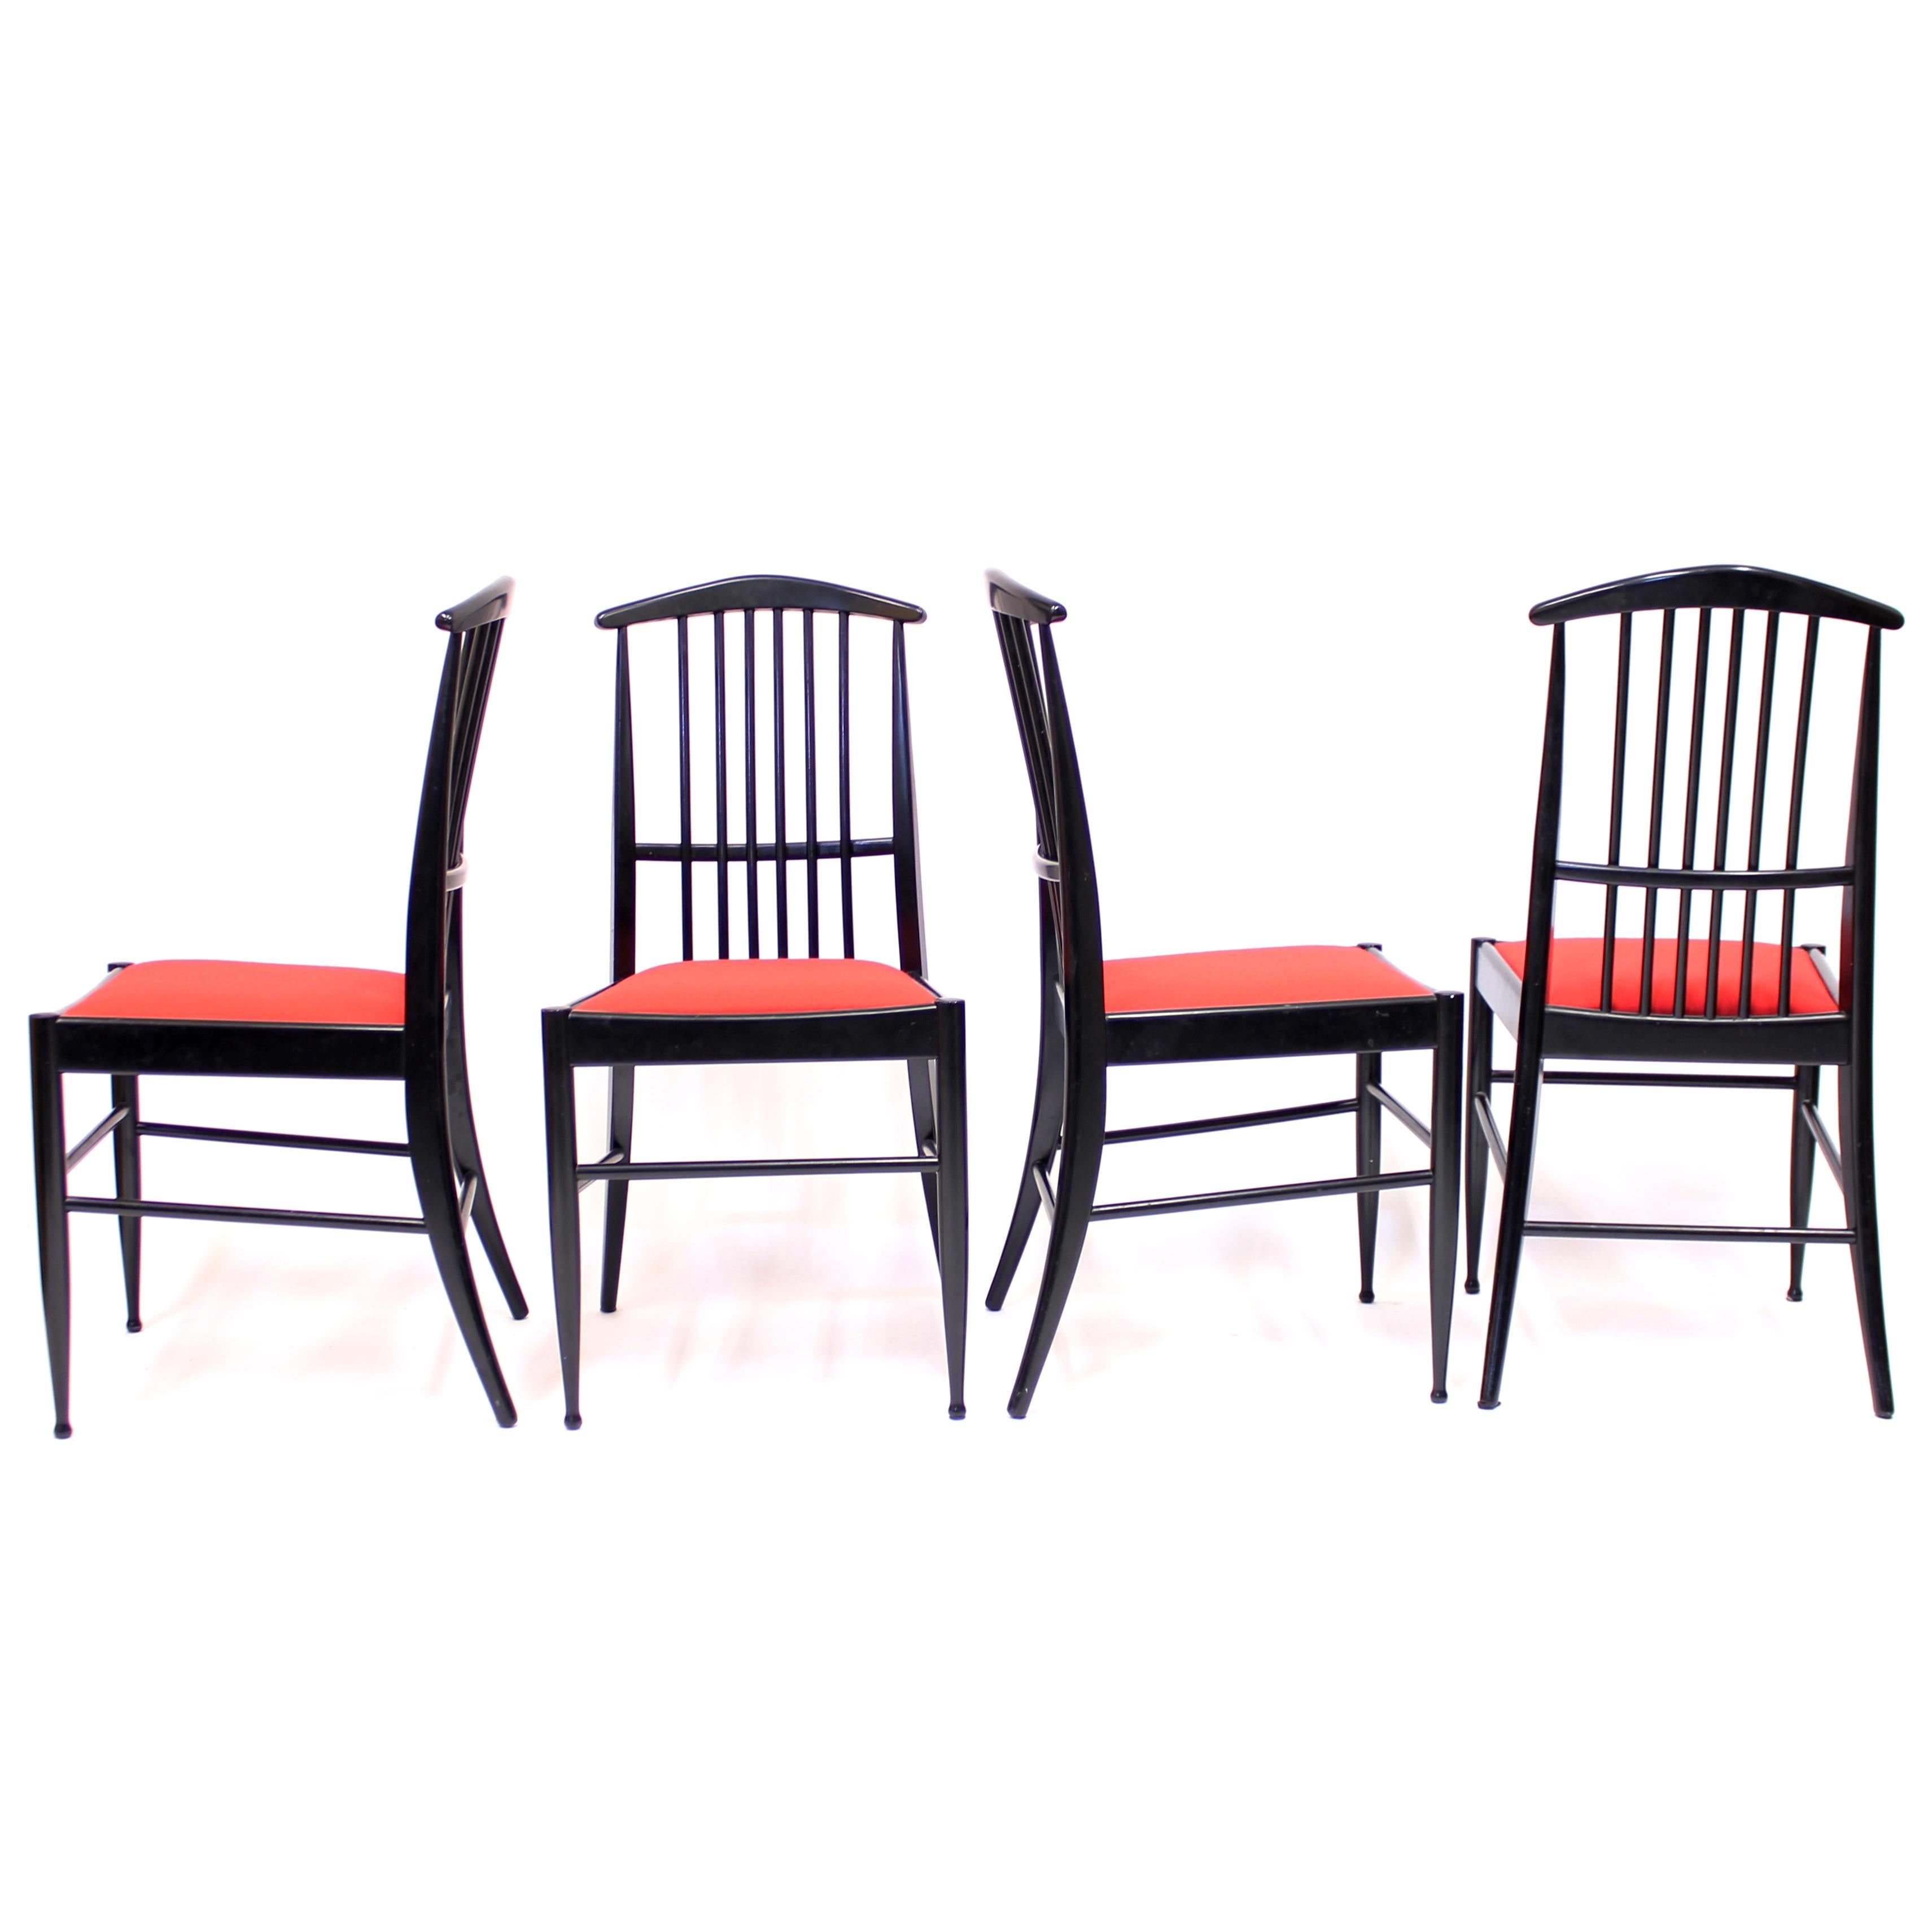 Fabric Kerstin Hörlin-Holmquist, set of 4 Charlotte dining chairs, ASKO, 1970s For Sale